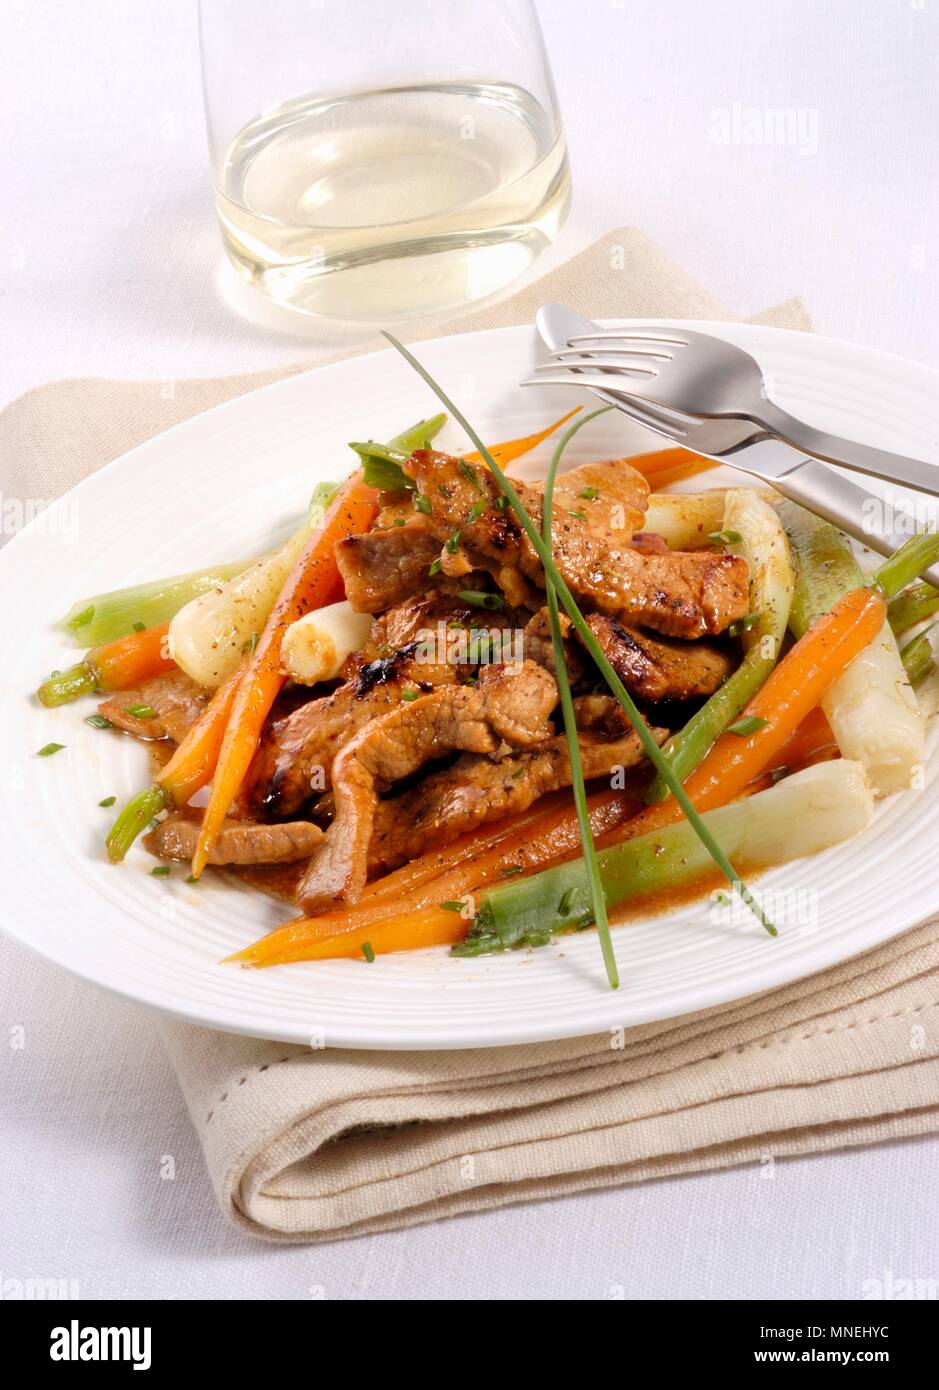 Veal strips with carrot and spring onions Stock Photo